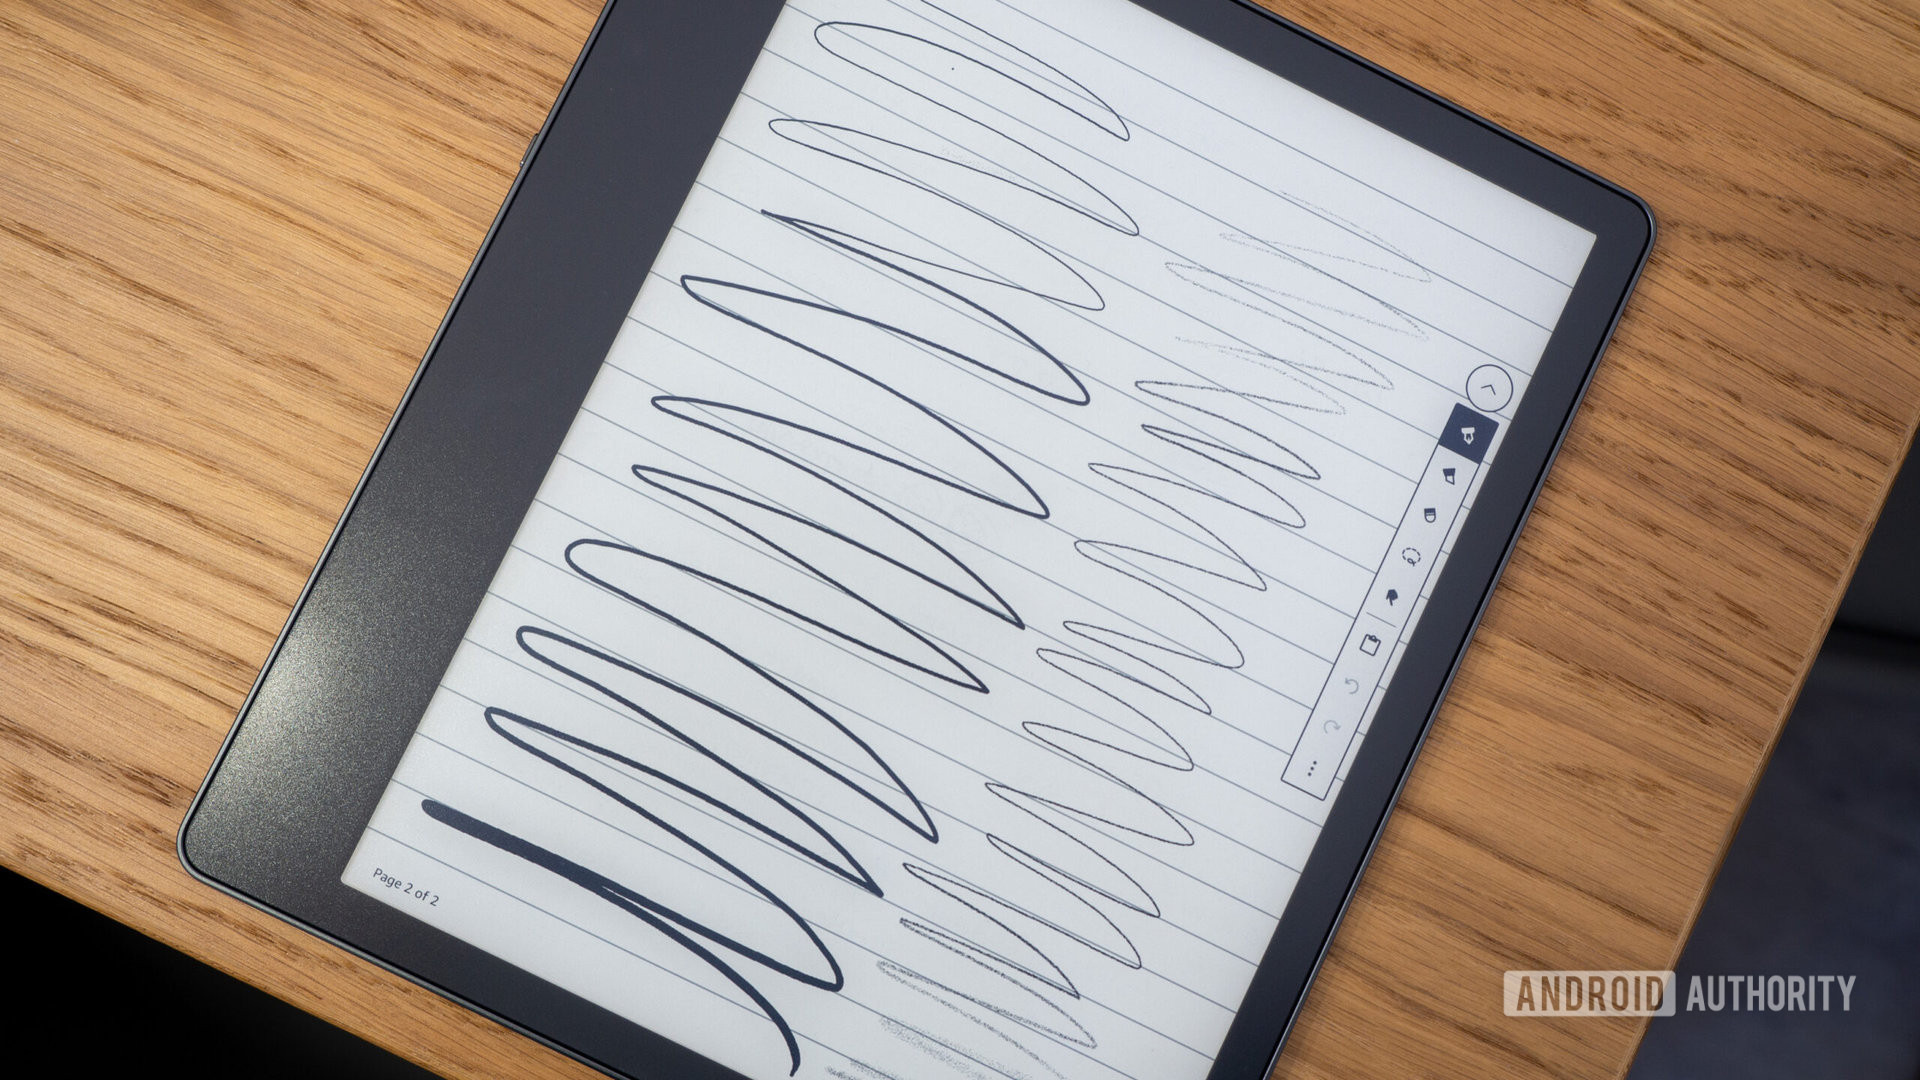 Amazon Kindle Scribe review: Remarkable or just note-worthy?